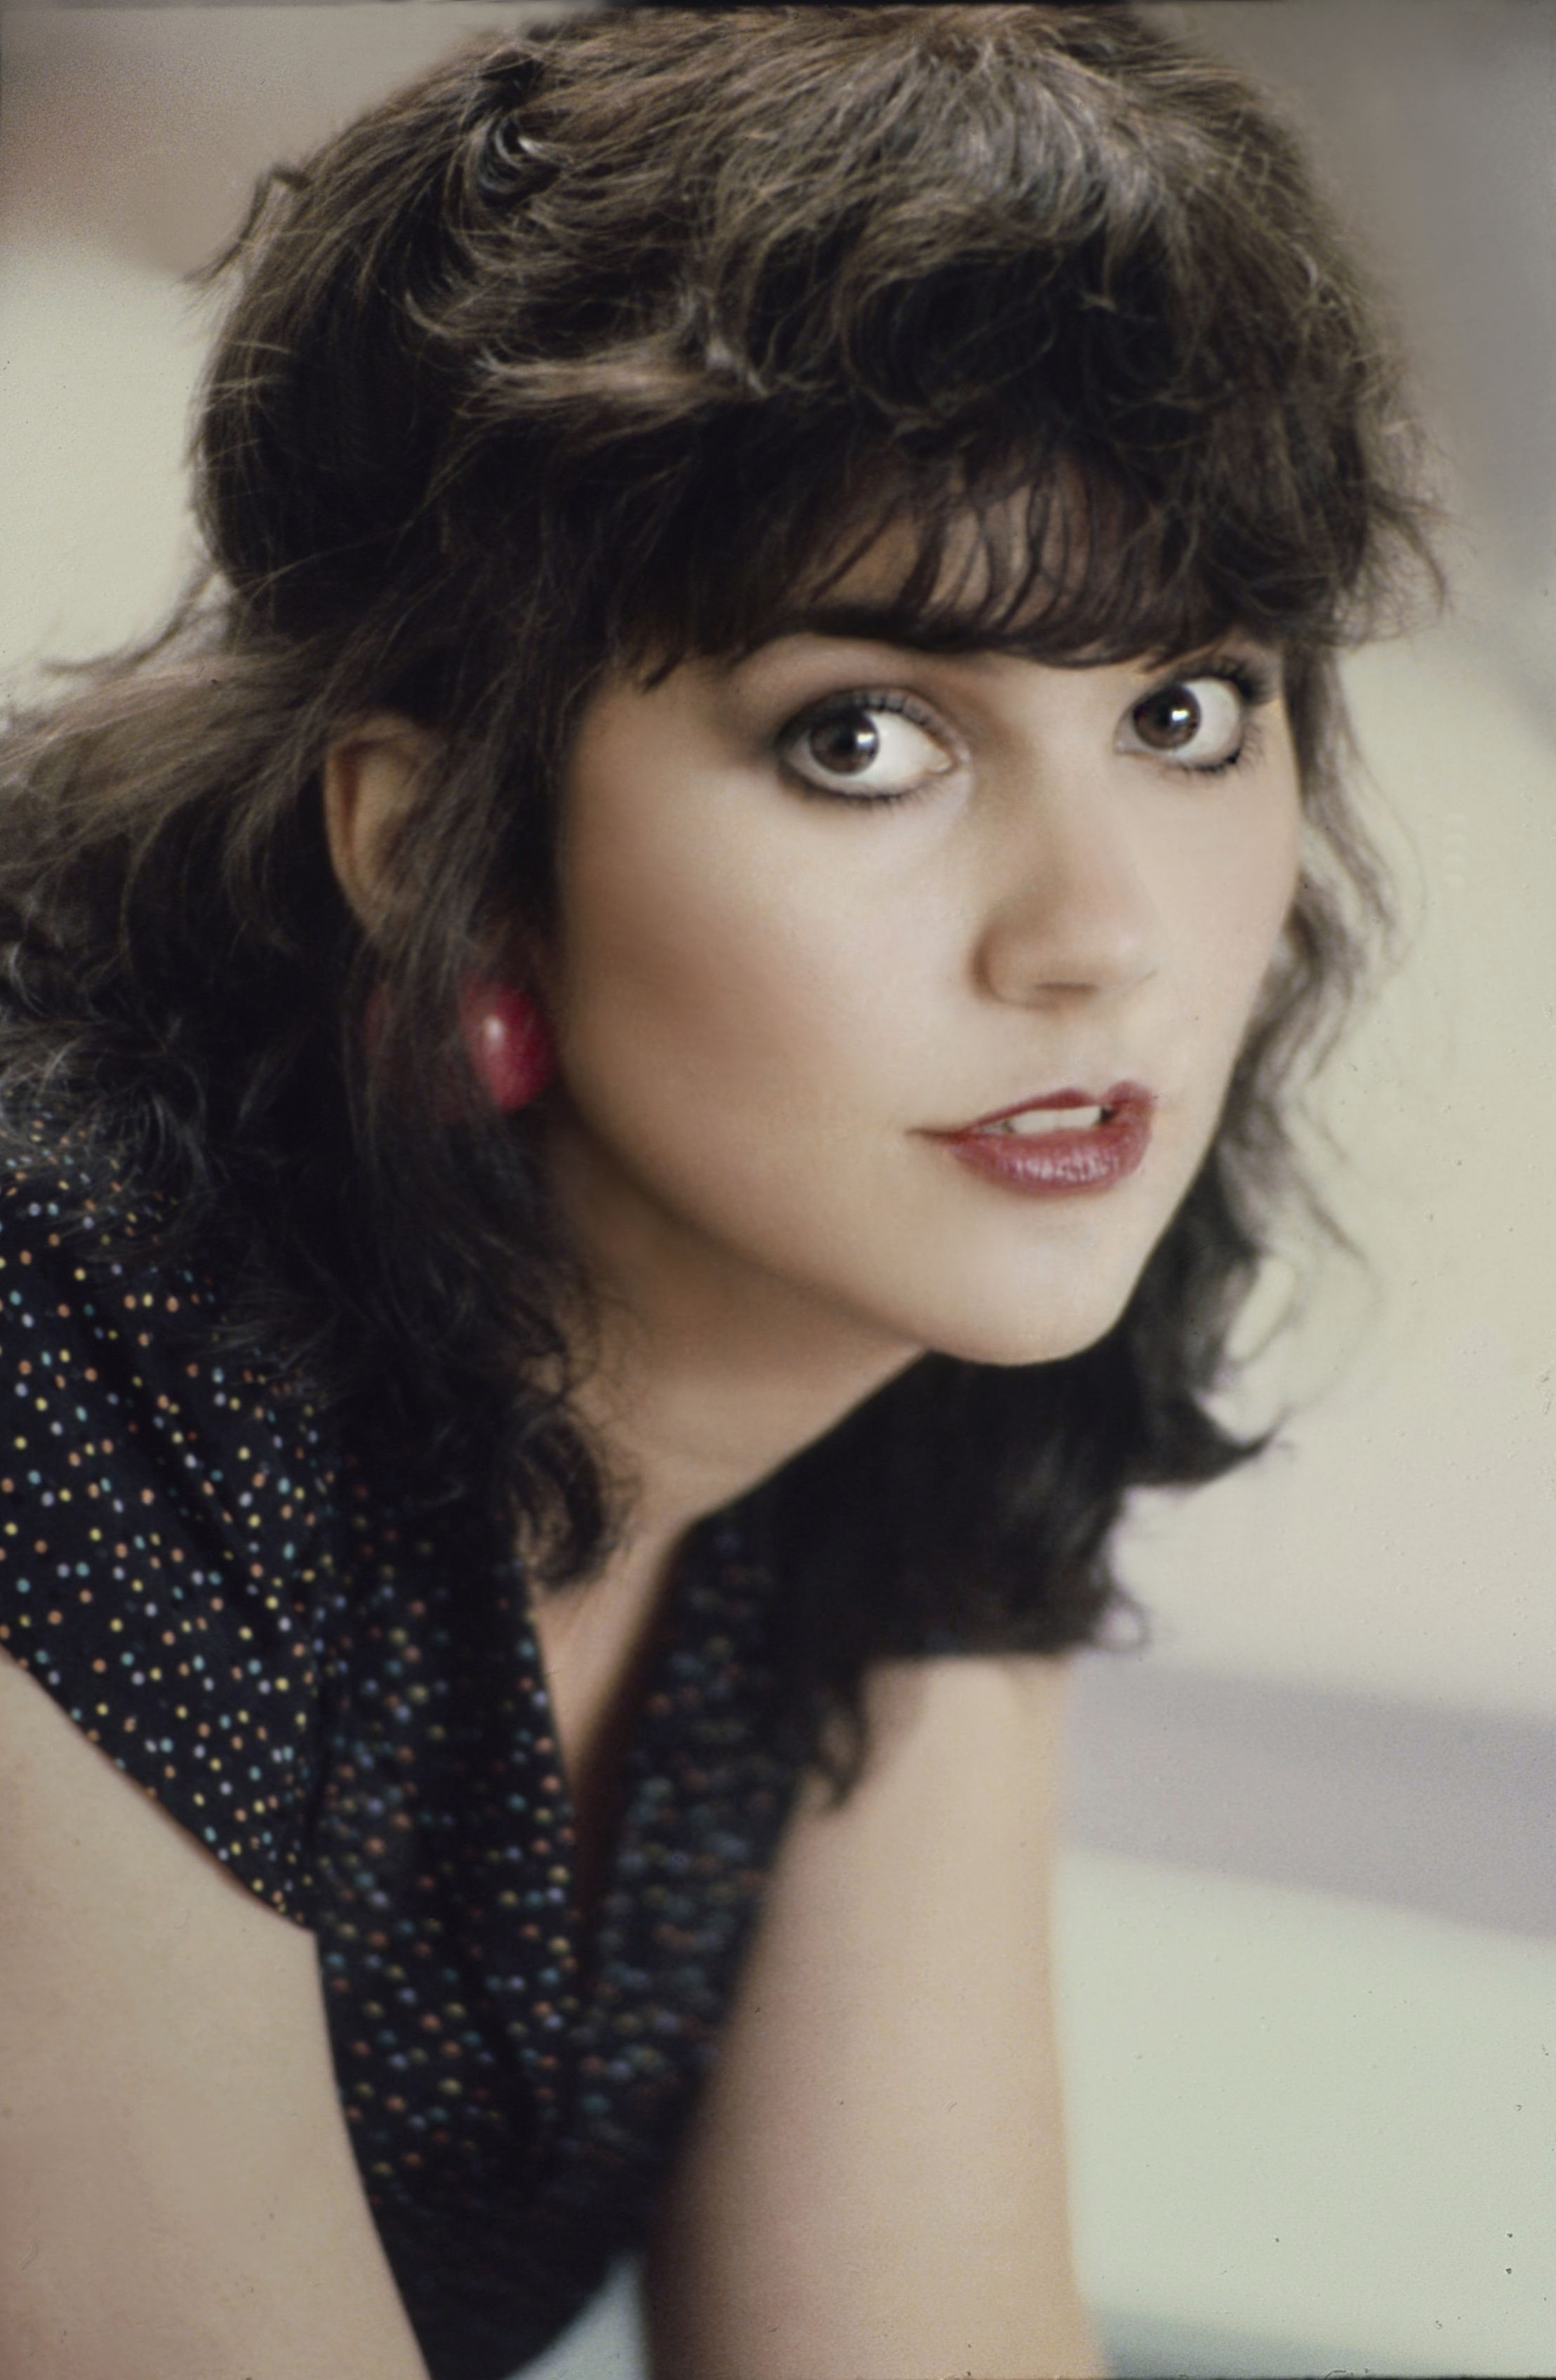 Linda Ronstadt poses for a portrait in Los Angeles, California, circa 1982 | Source: Getty Images